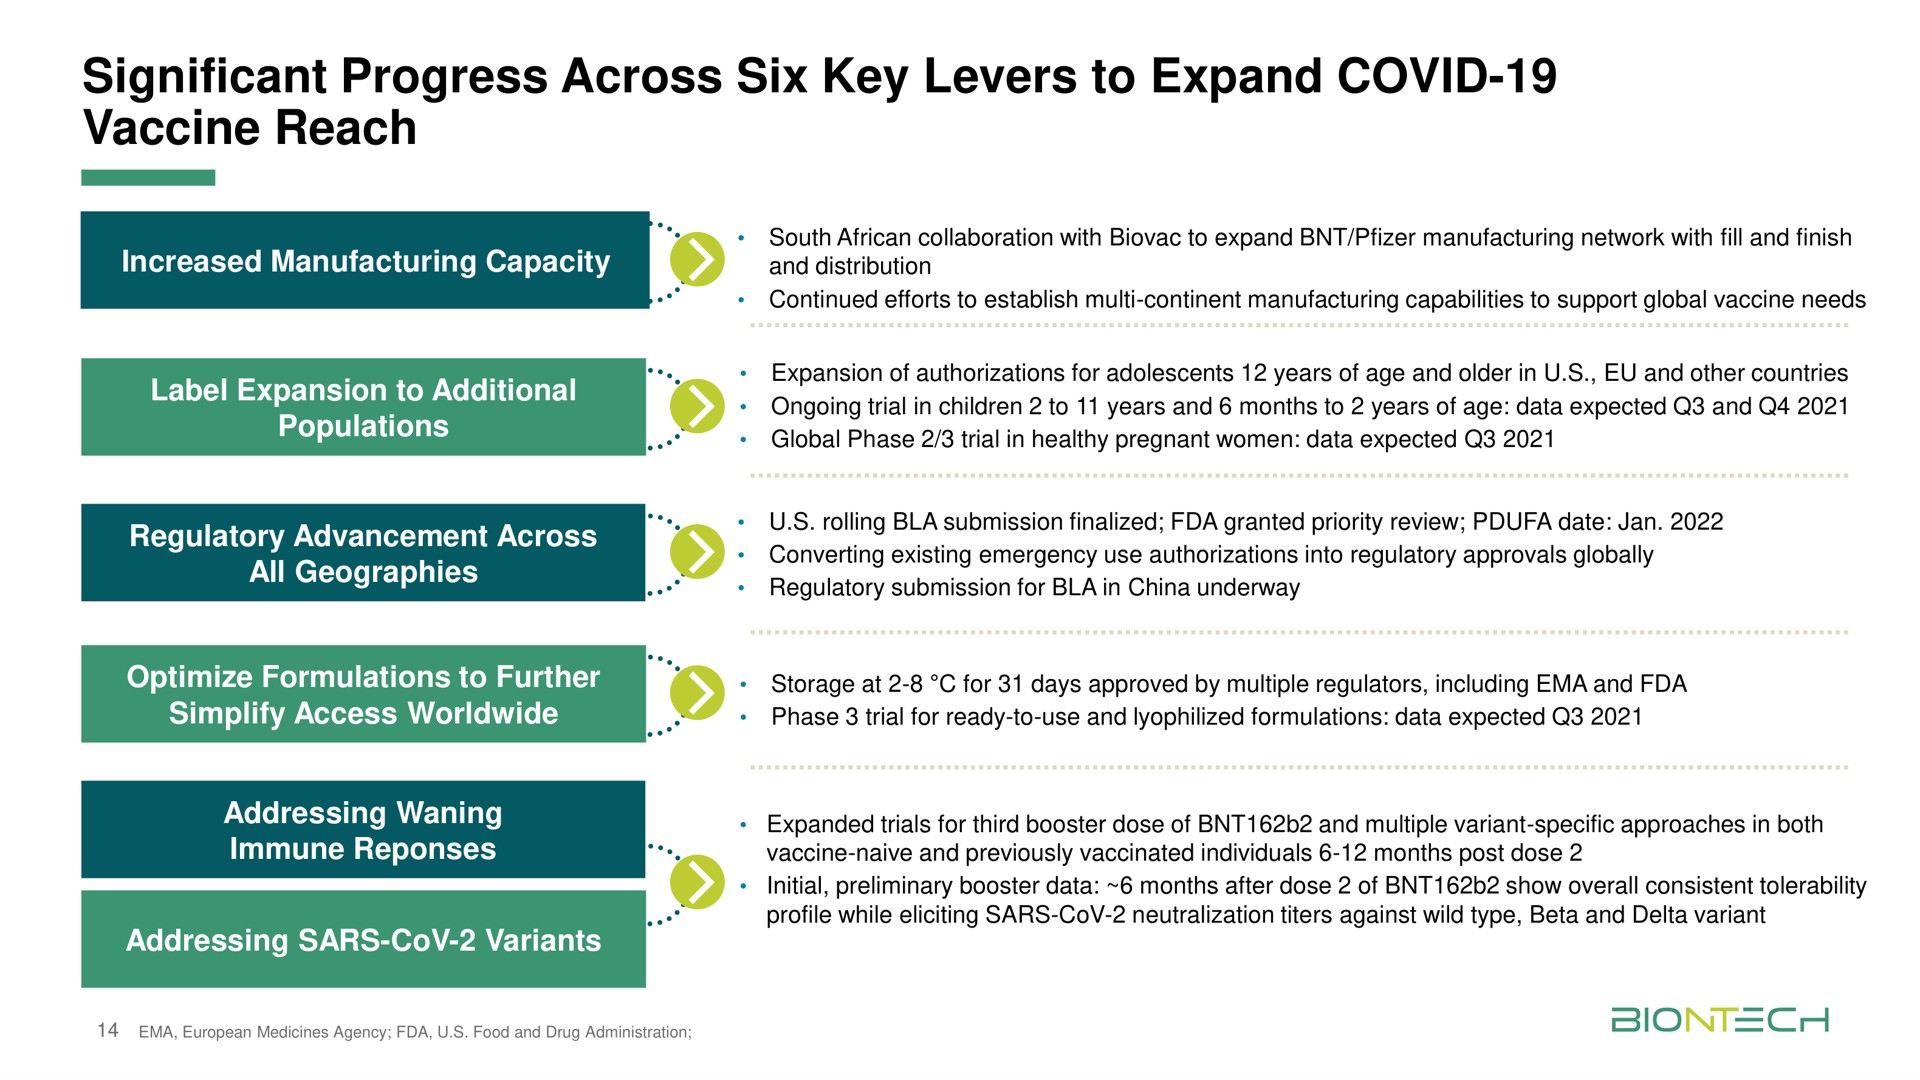 significant progress across six key levers to expand covid vaccine reach | BioNTech